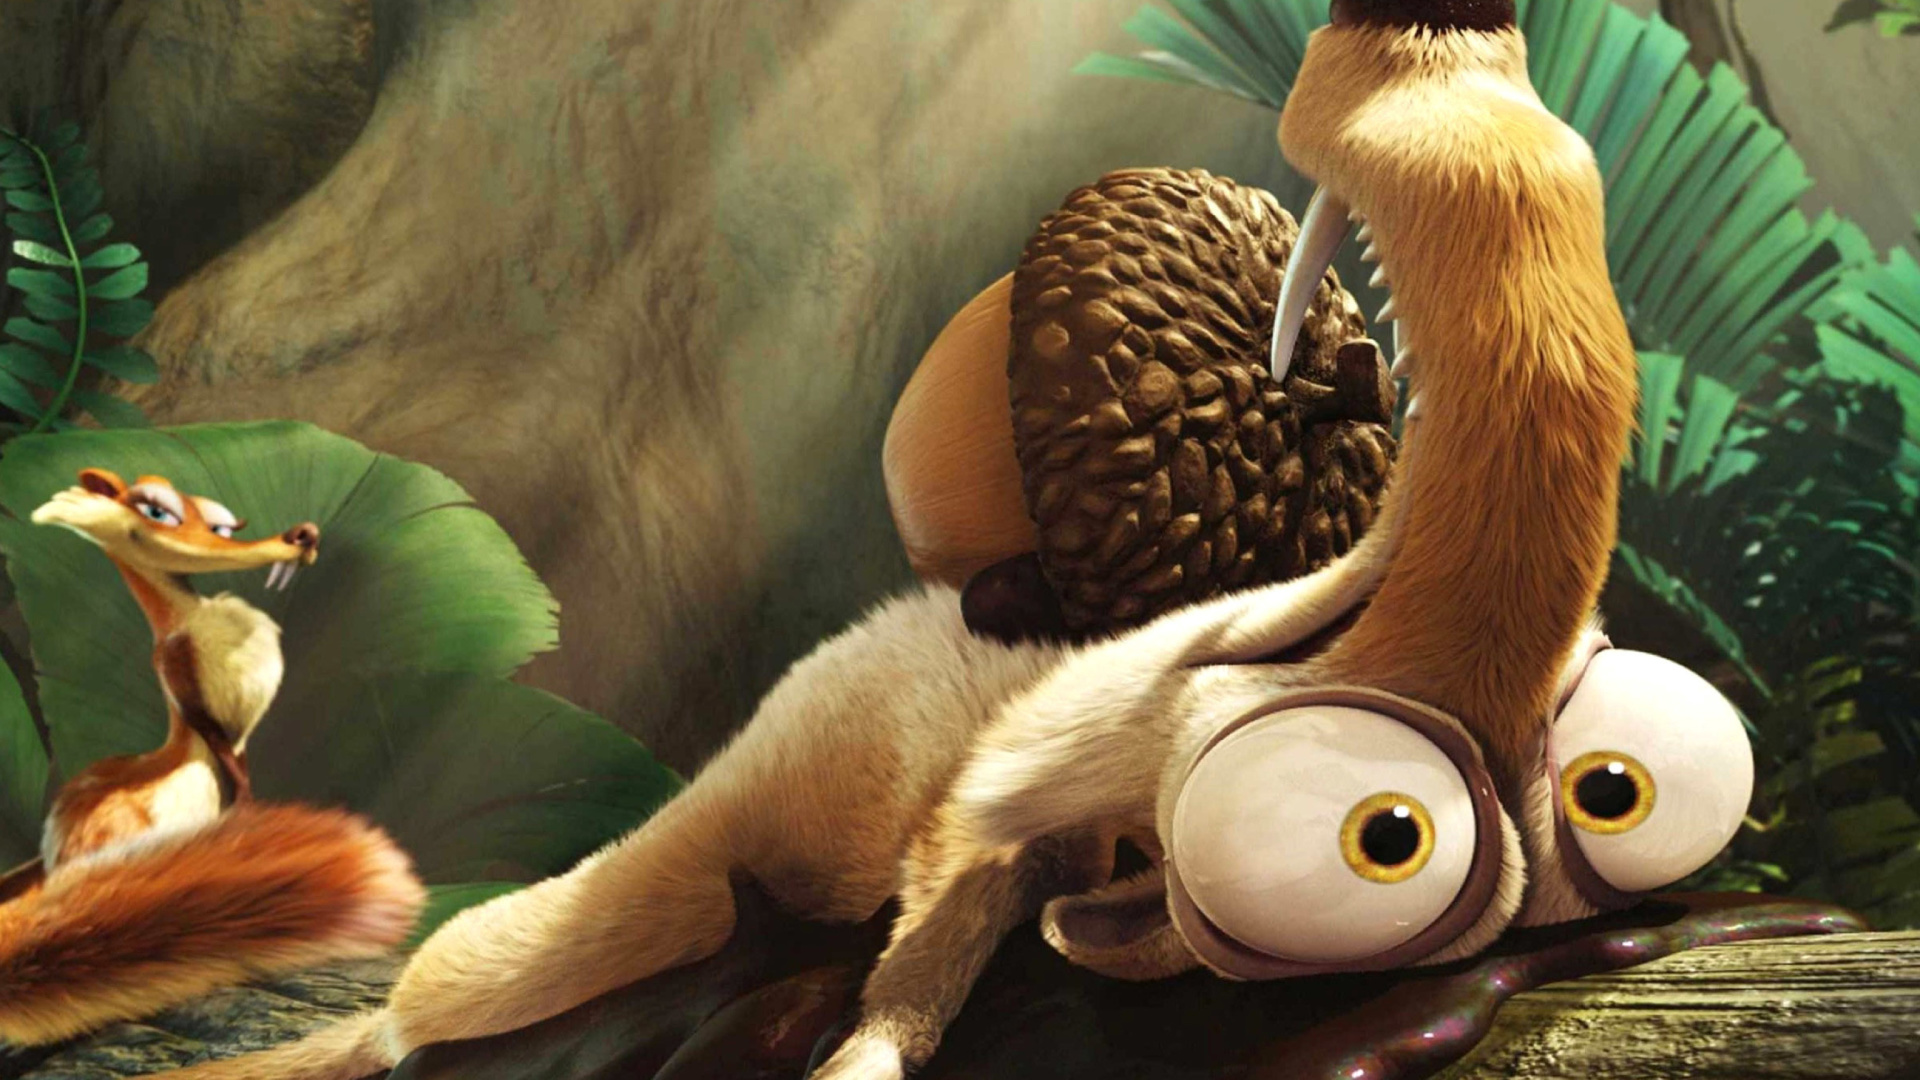 Scrat from Ice Age Dawn Of The Dinosaurs wallpaper 1920x1080